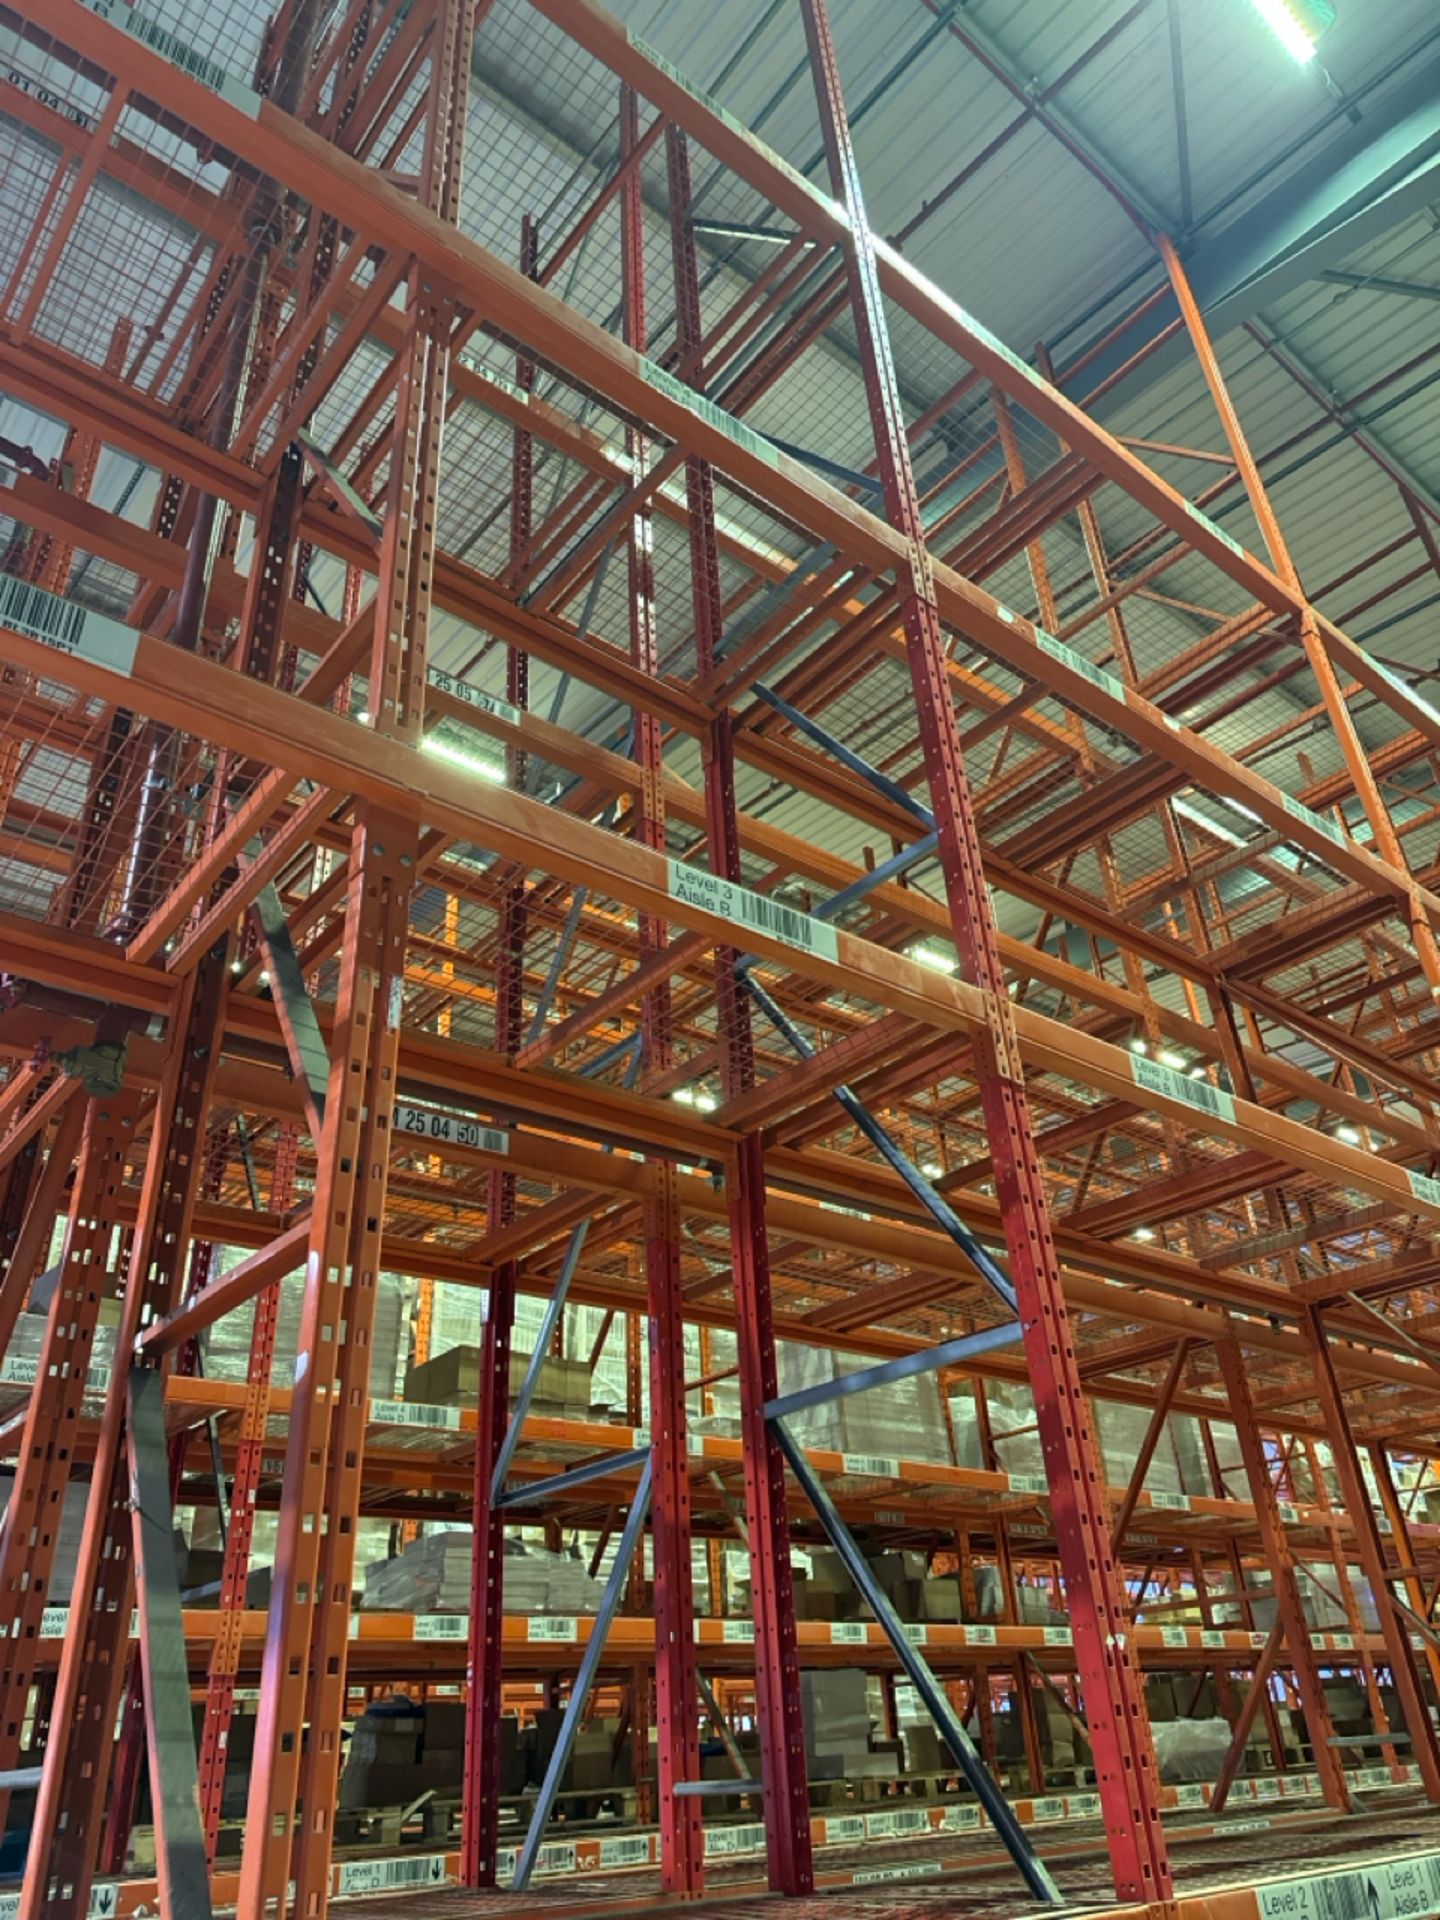 22 Bays Of Boltless Pallet Racking - Image 5 of 5